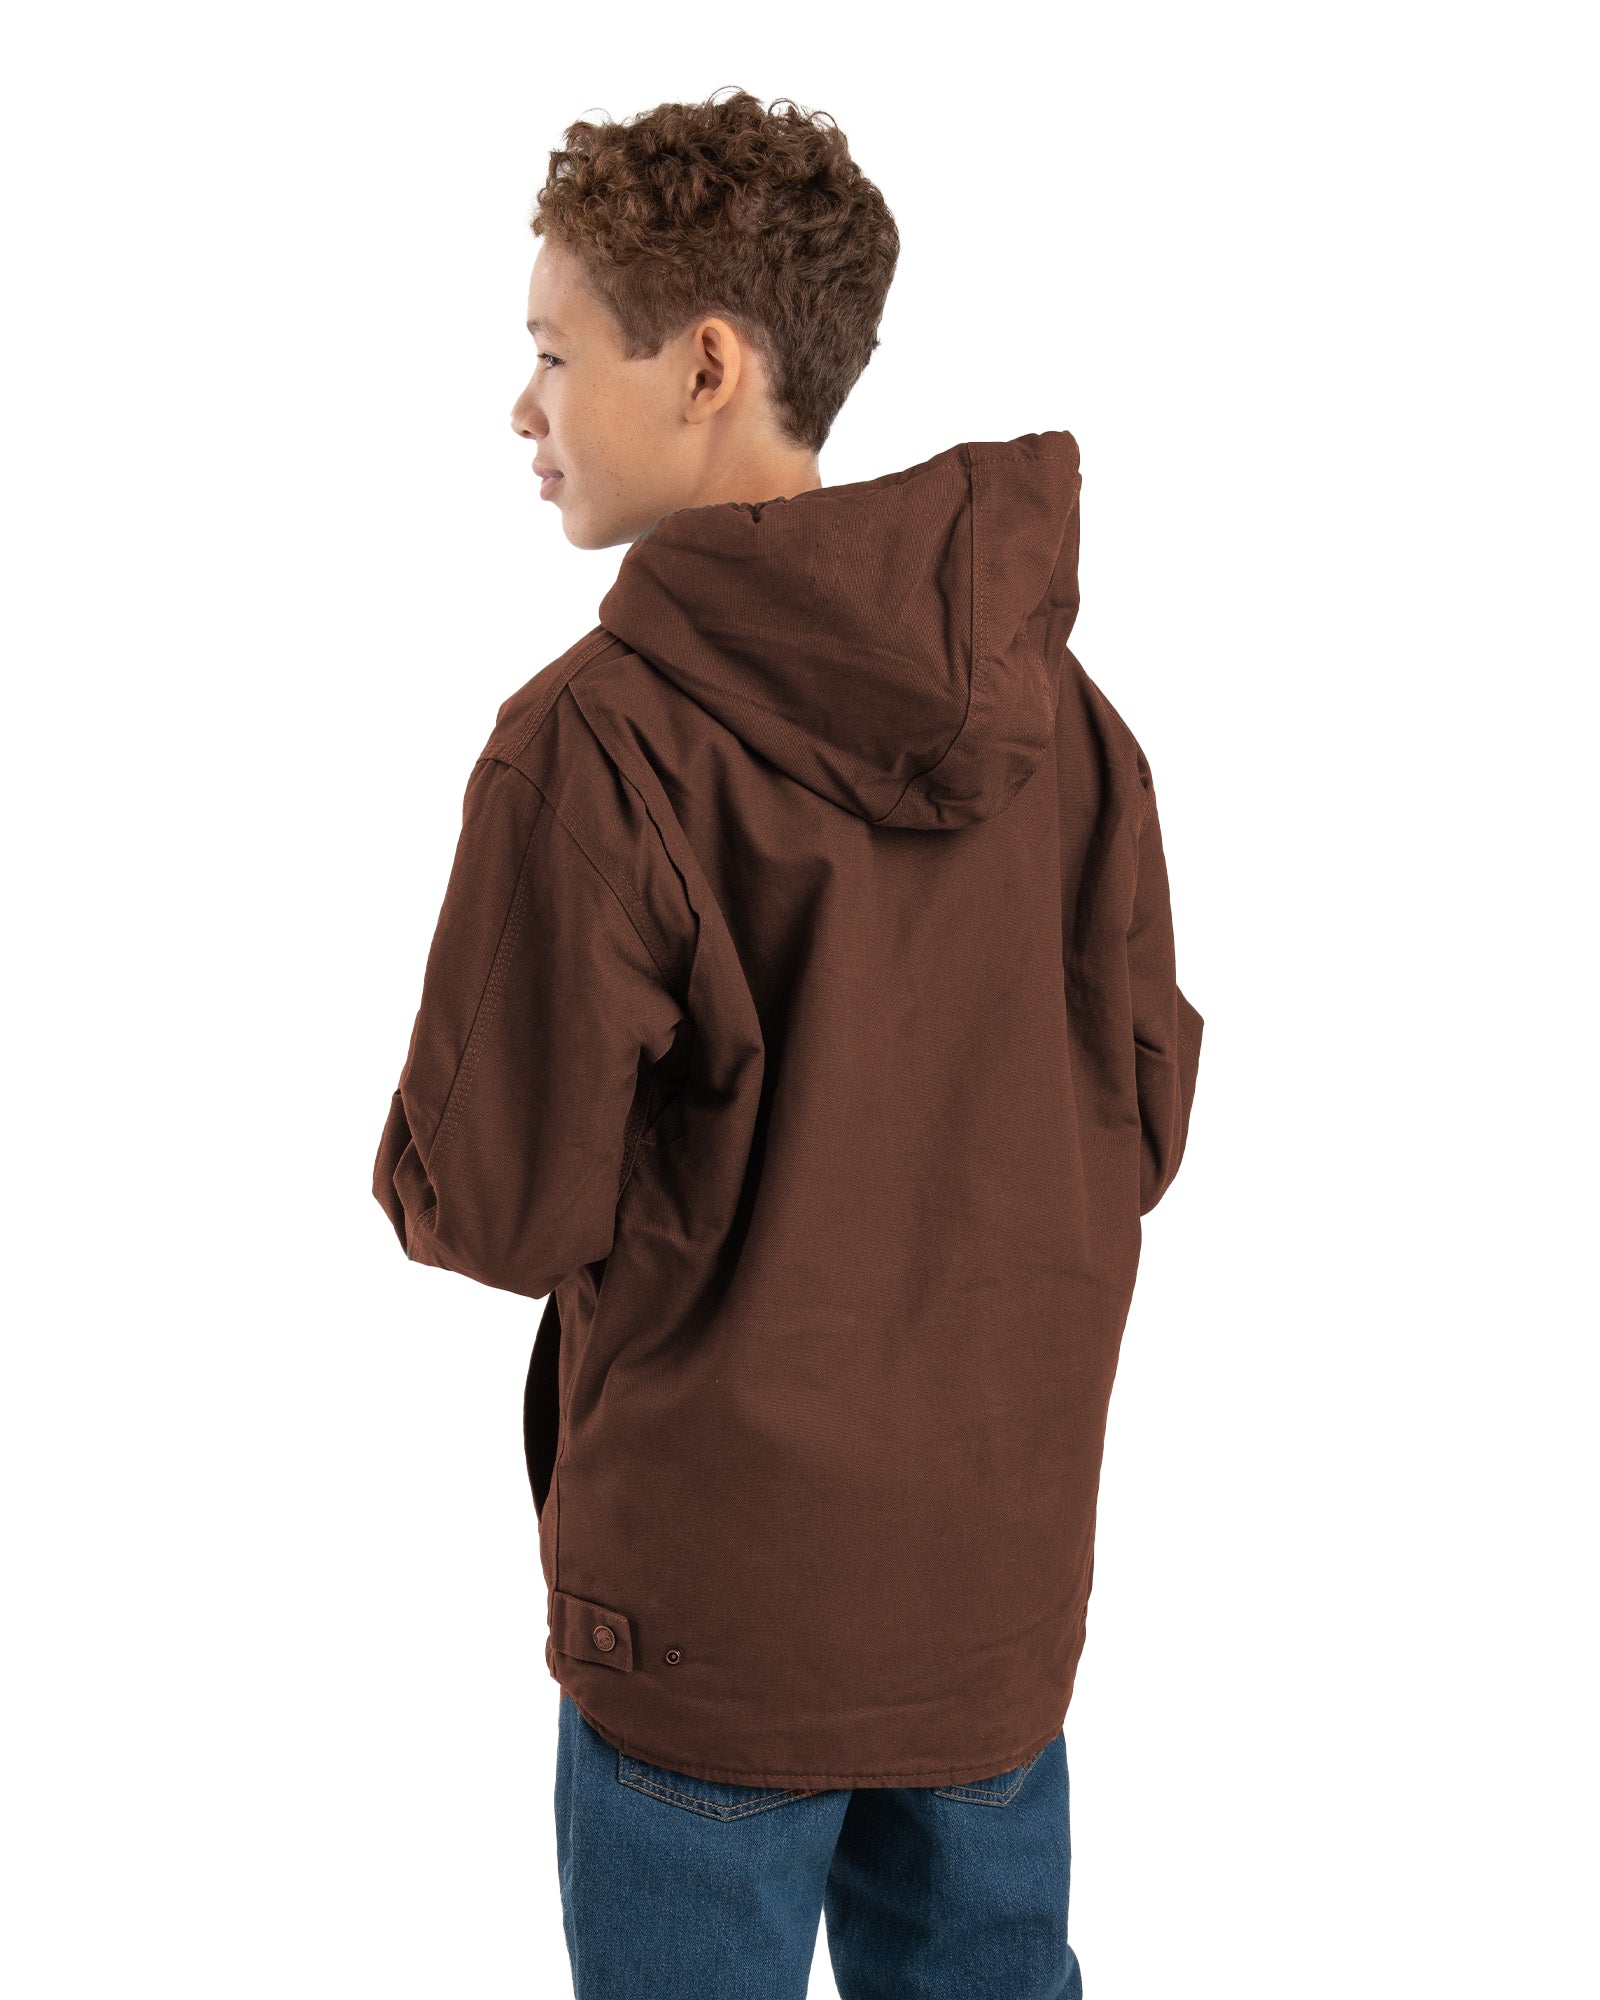 BHJ42BB Youth Sherpa-Lined Softstone Duck Hooded Jacket